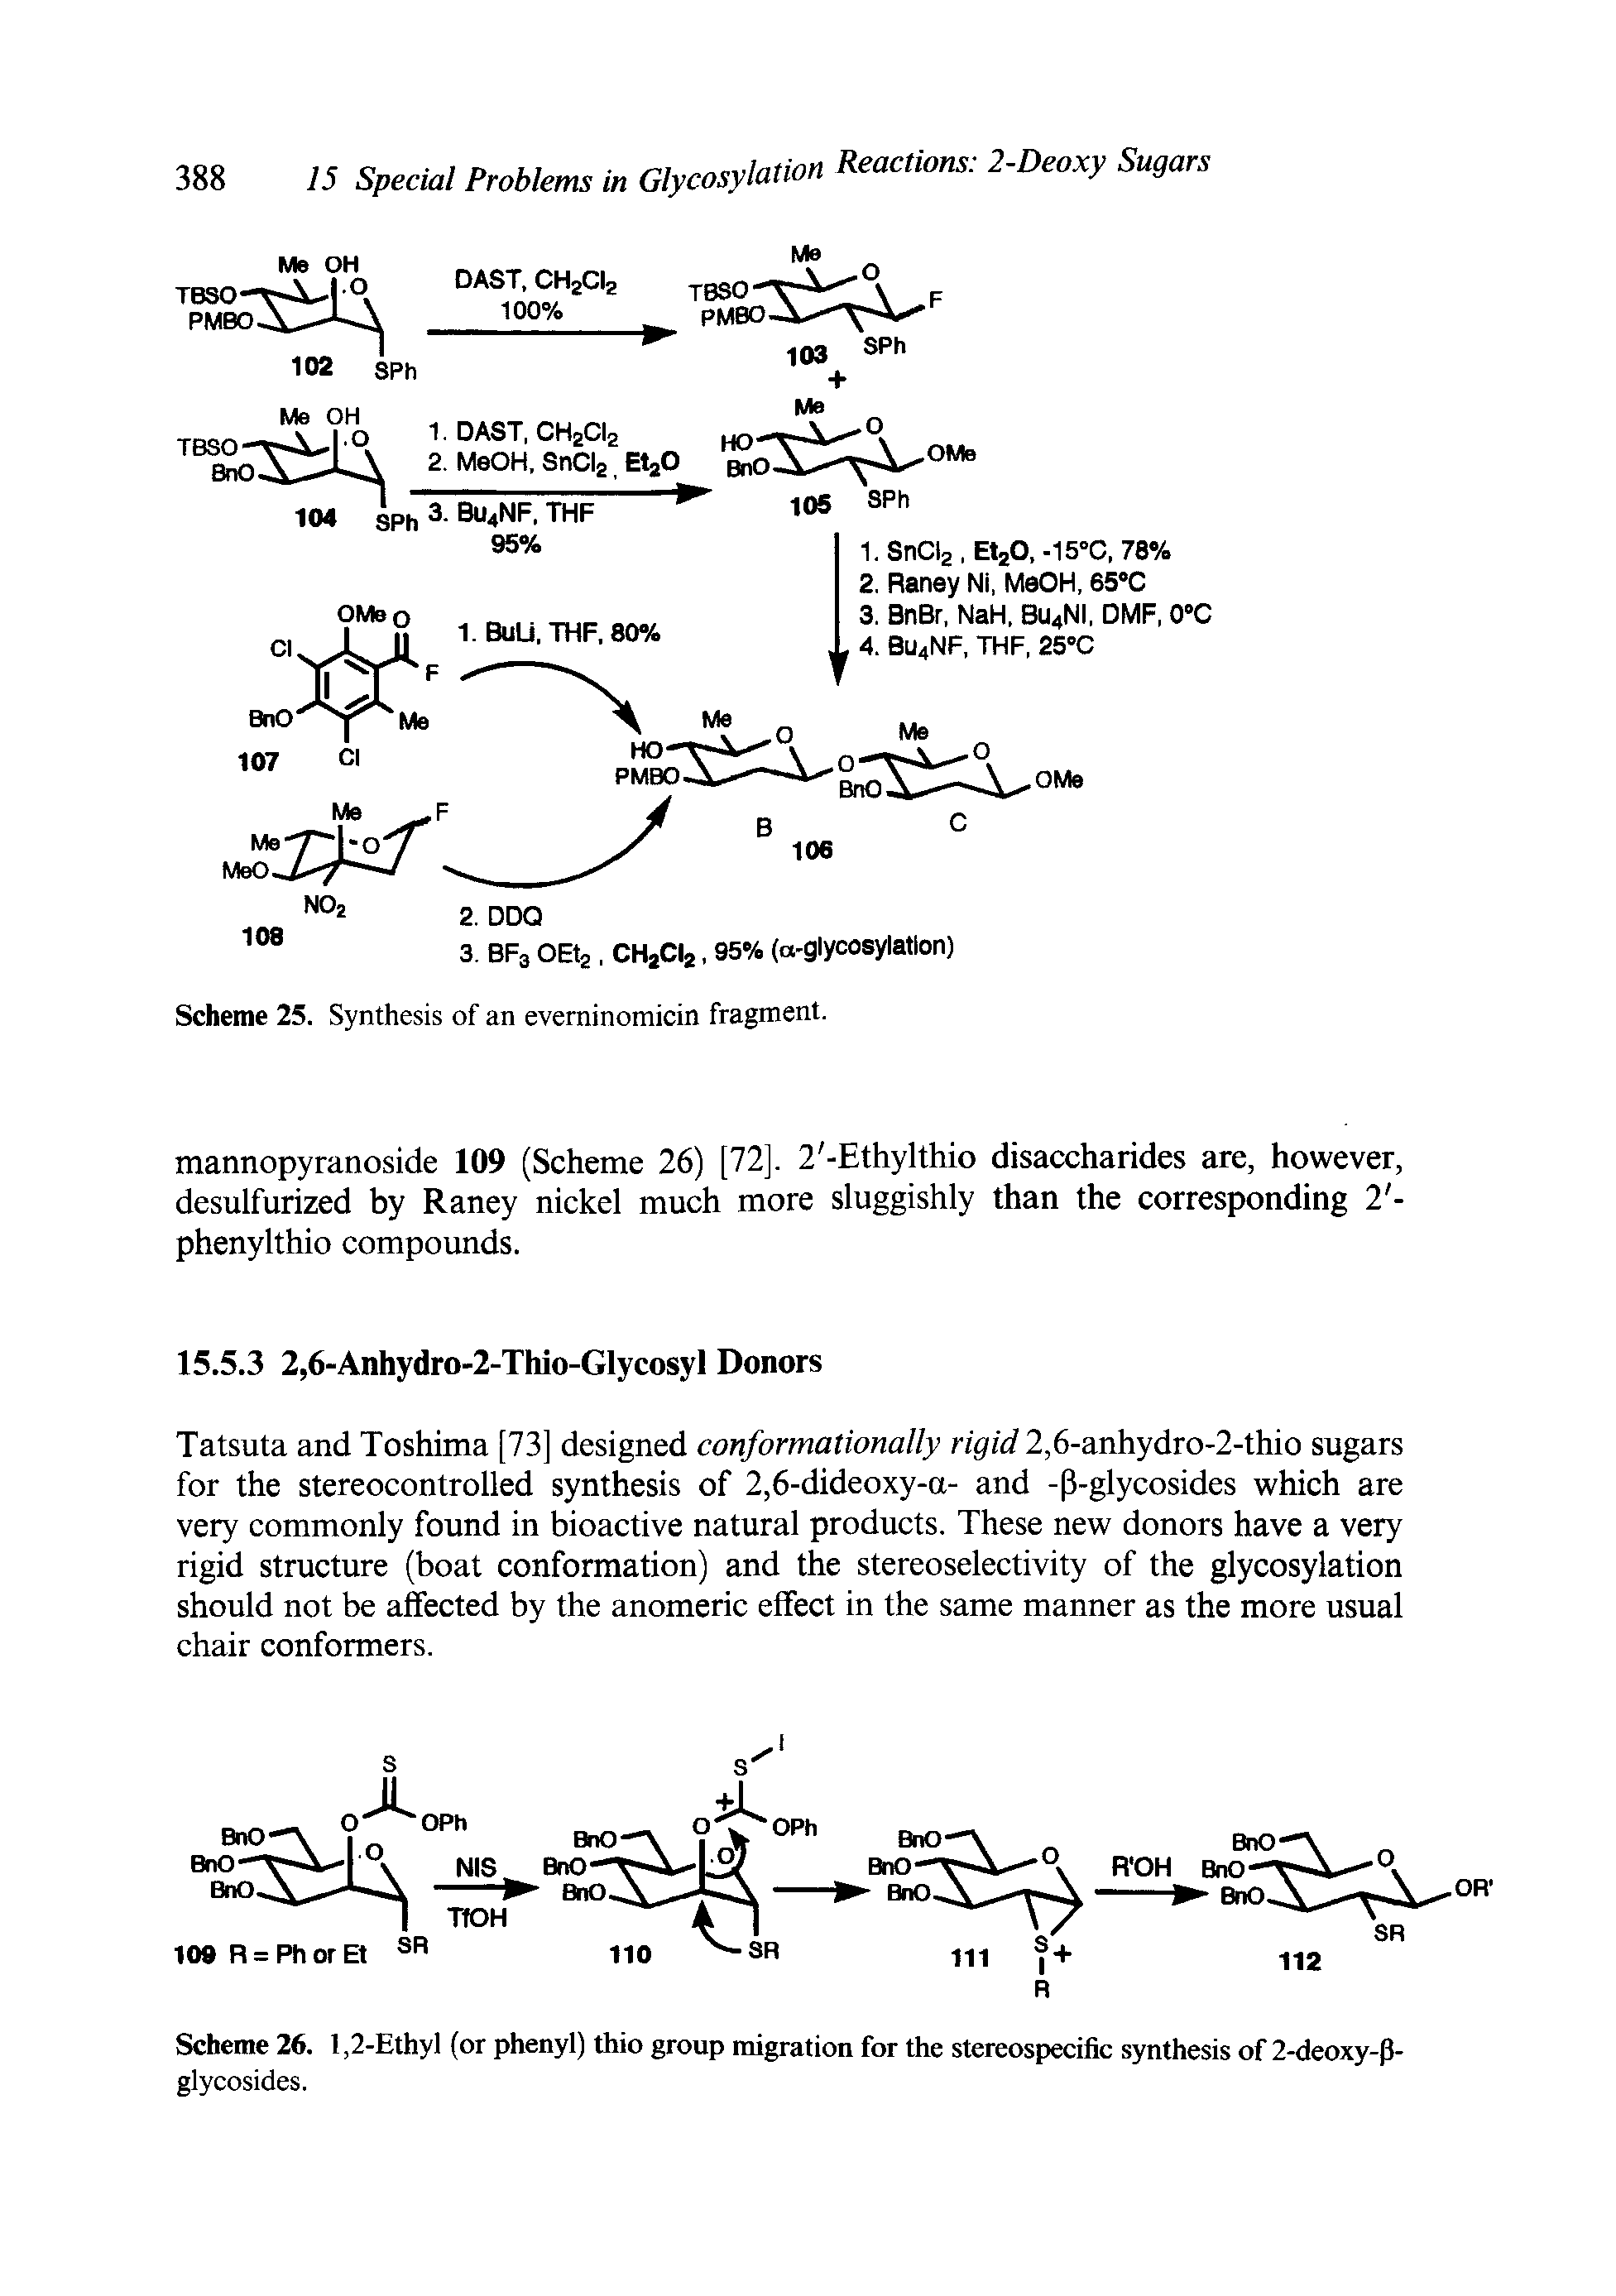 Scheme 26. 1,2-Ethyl (or phenyl) thio group migration for the stereospecific synthesis of 2-deoxy-P-glycosides.